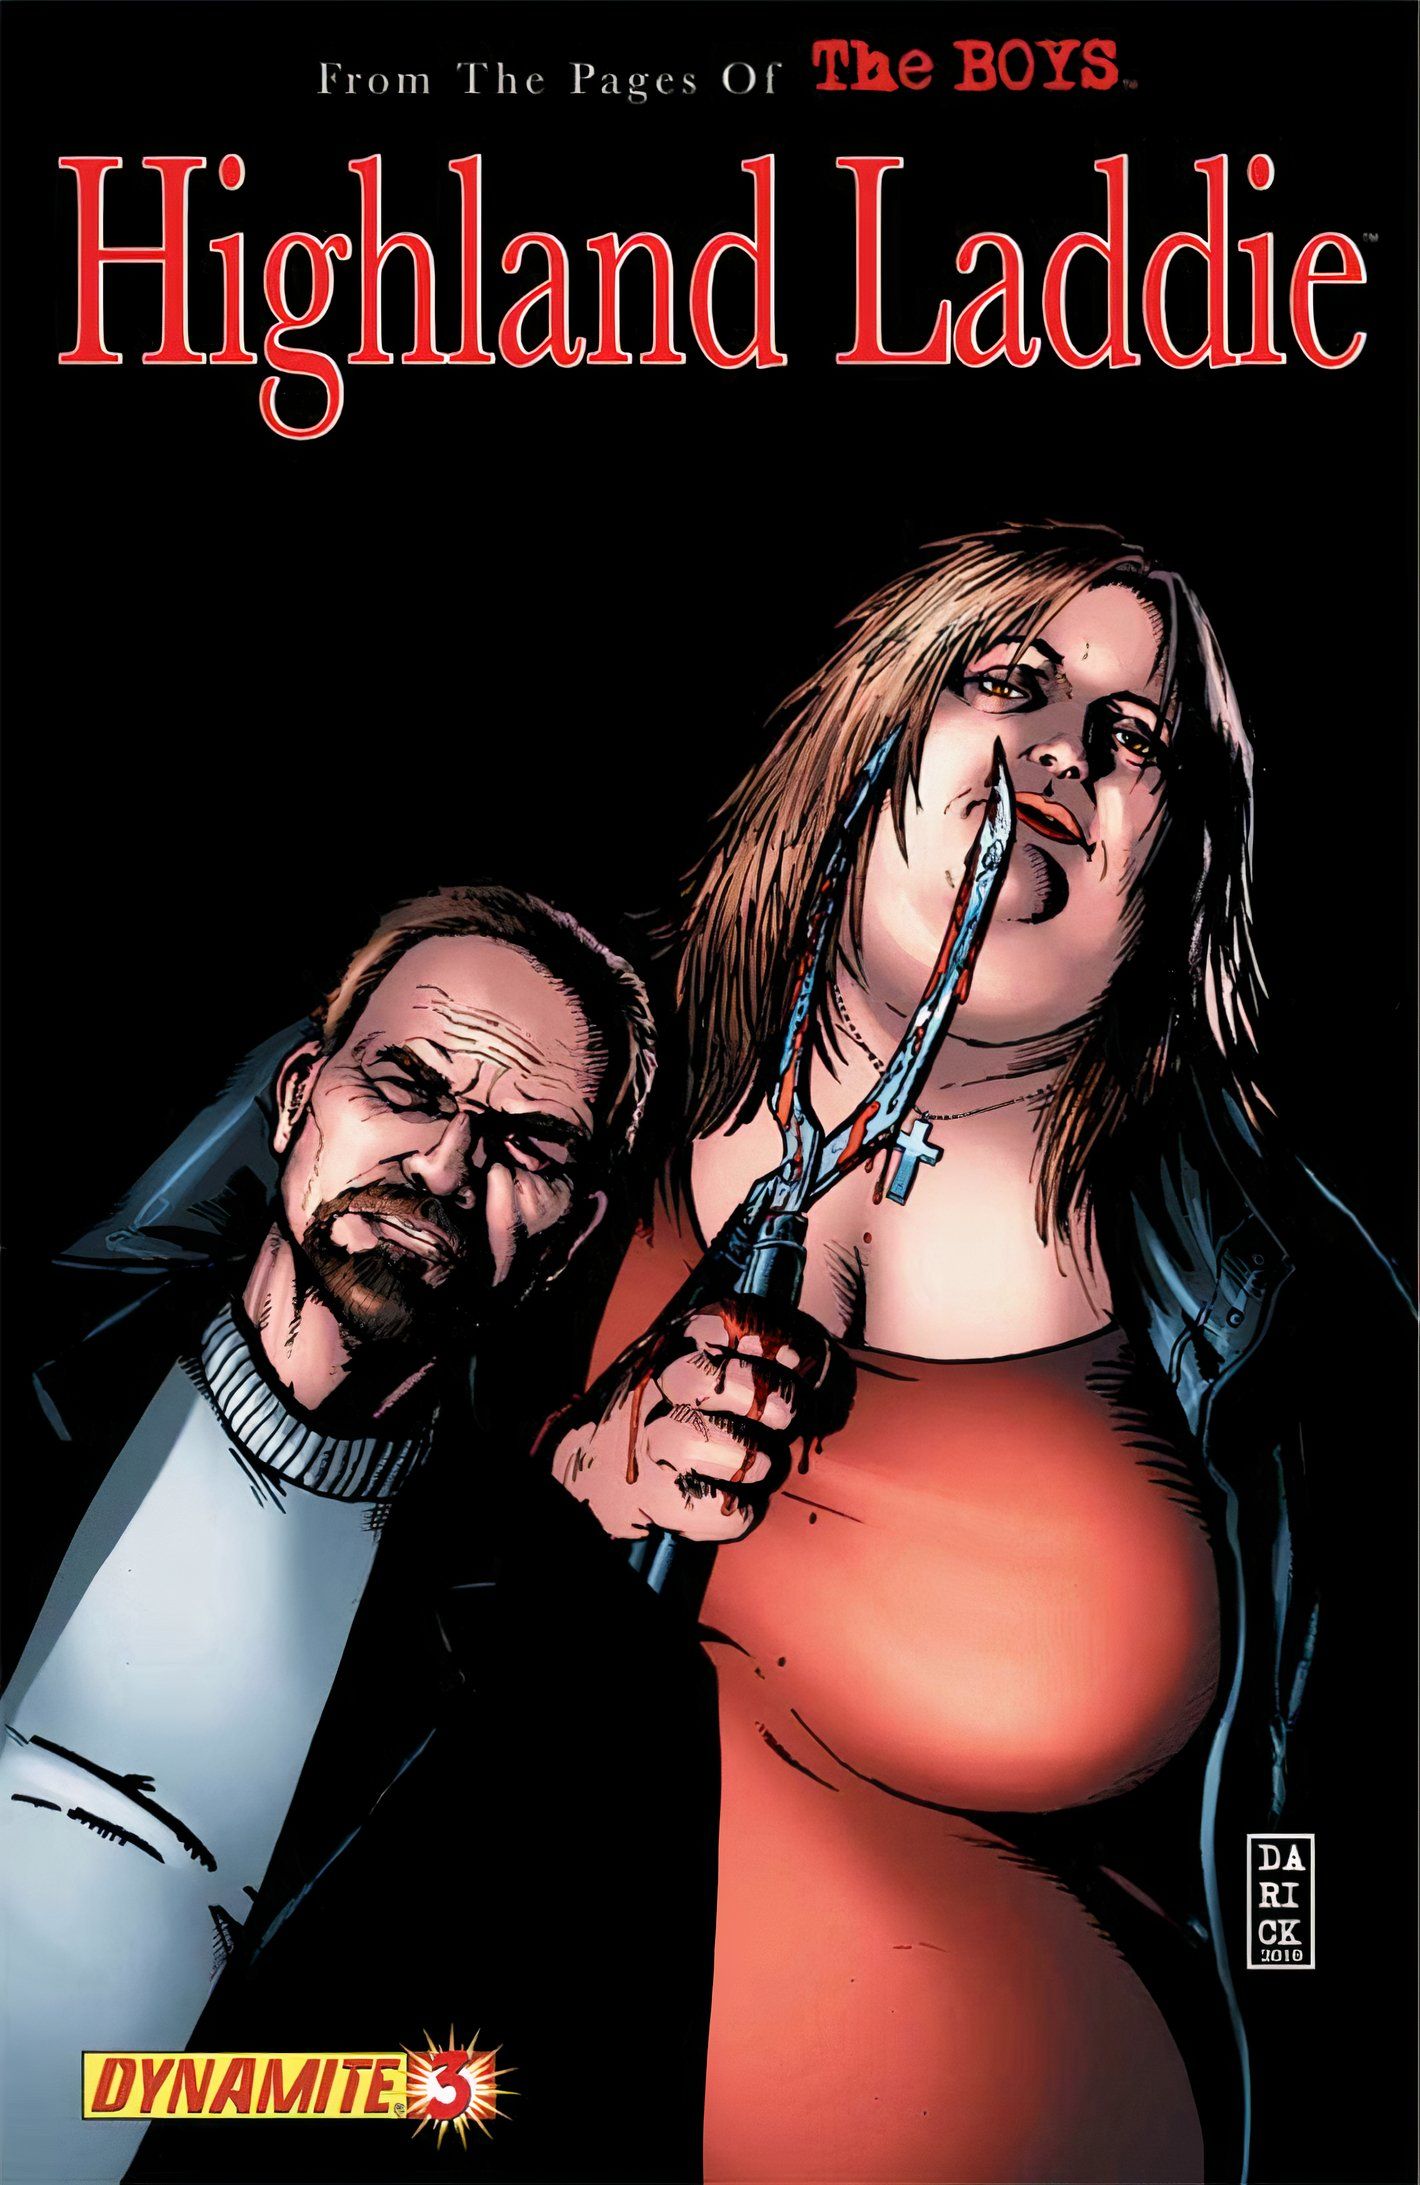 The Boys: Highland Laddie #3 cover, Hughie and his aunt, who holds a sharp, bloody pair of medical shears.